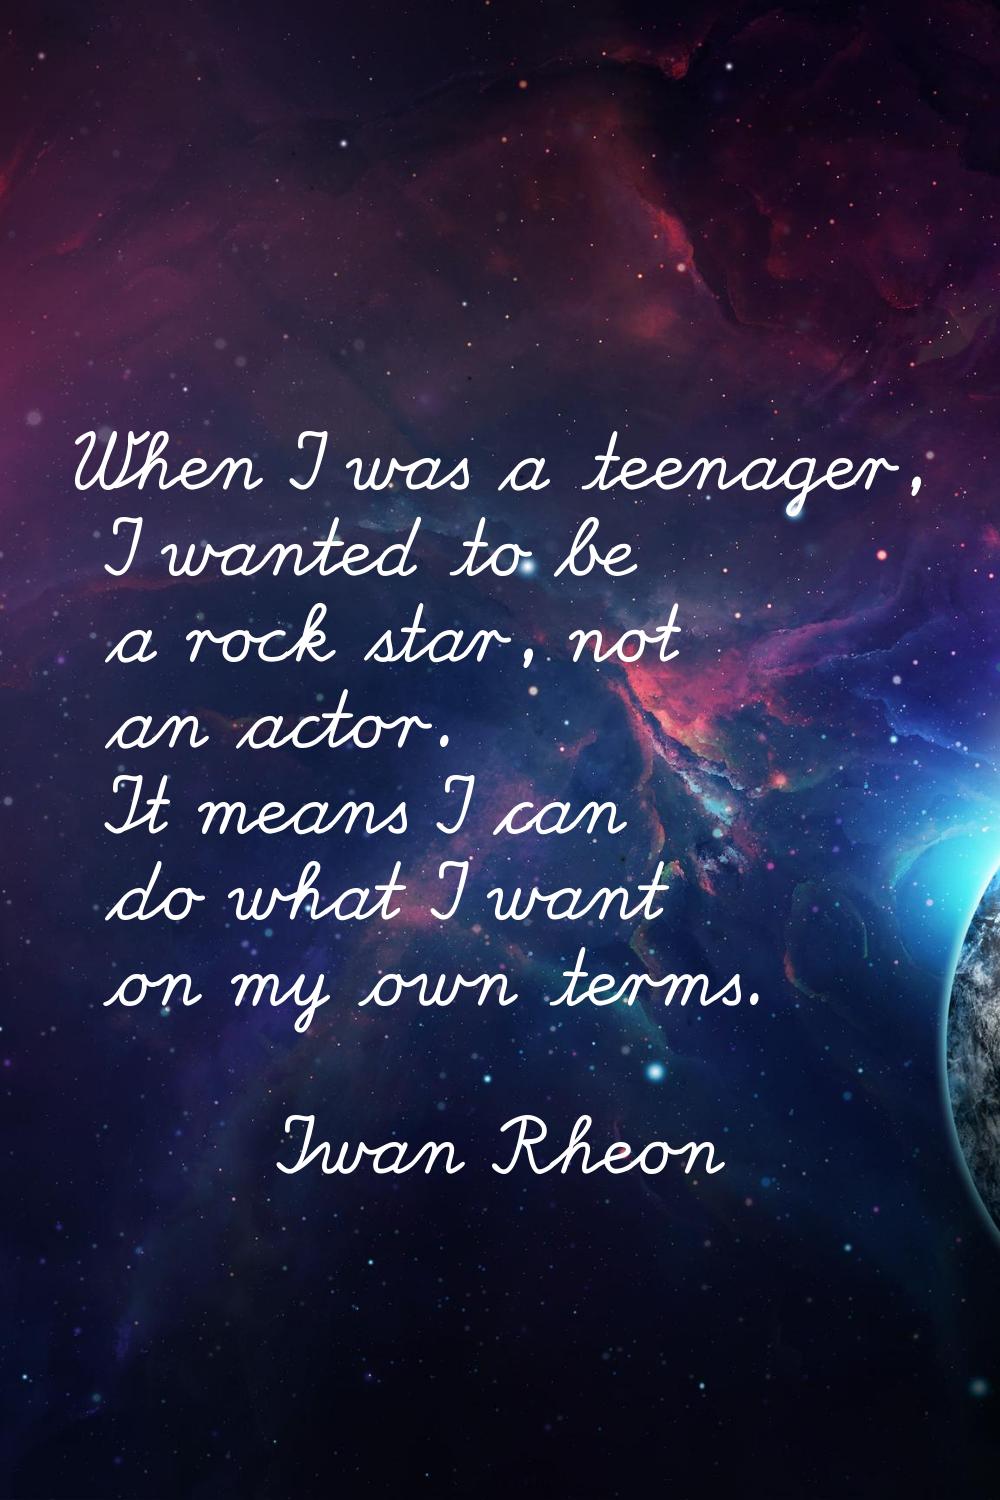 When I was a teenager, I wanted to be a rock star, not an actor. It means I can do what I want on m